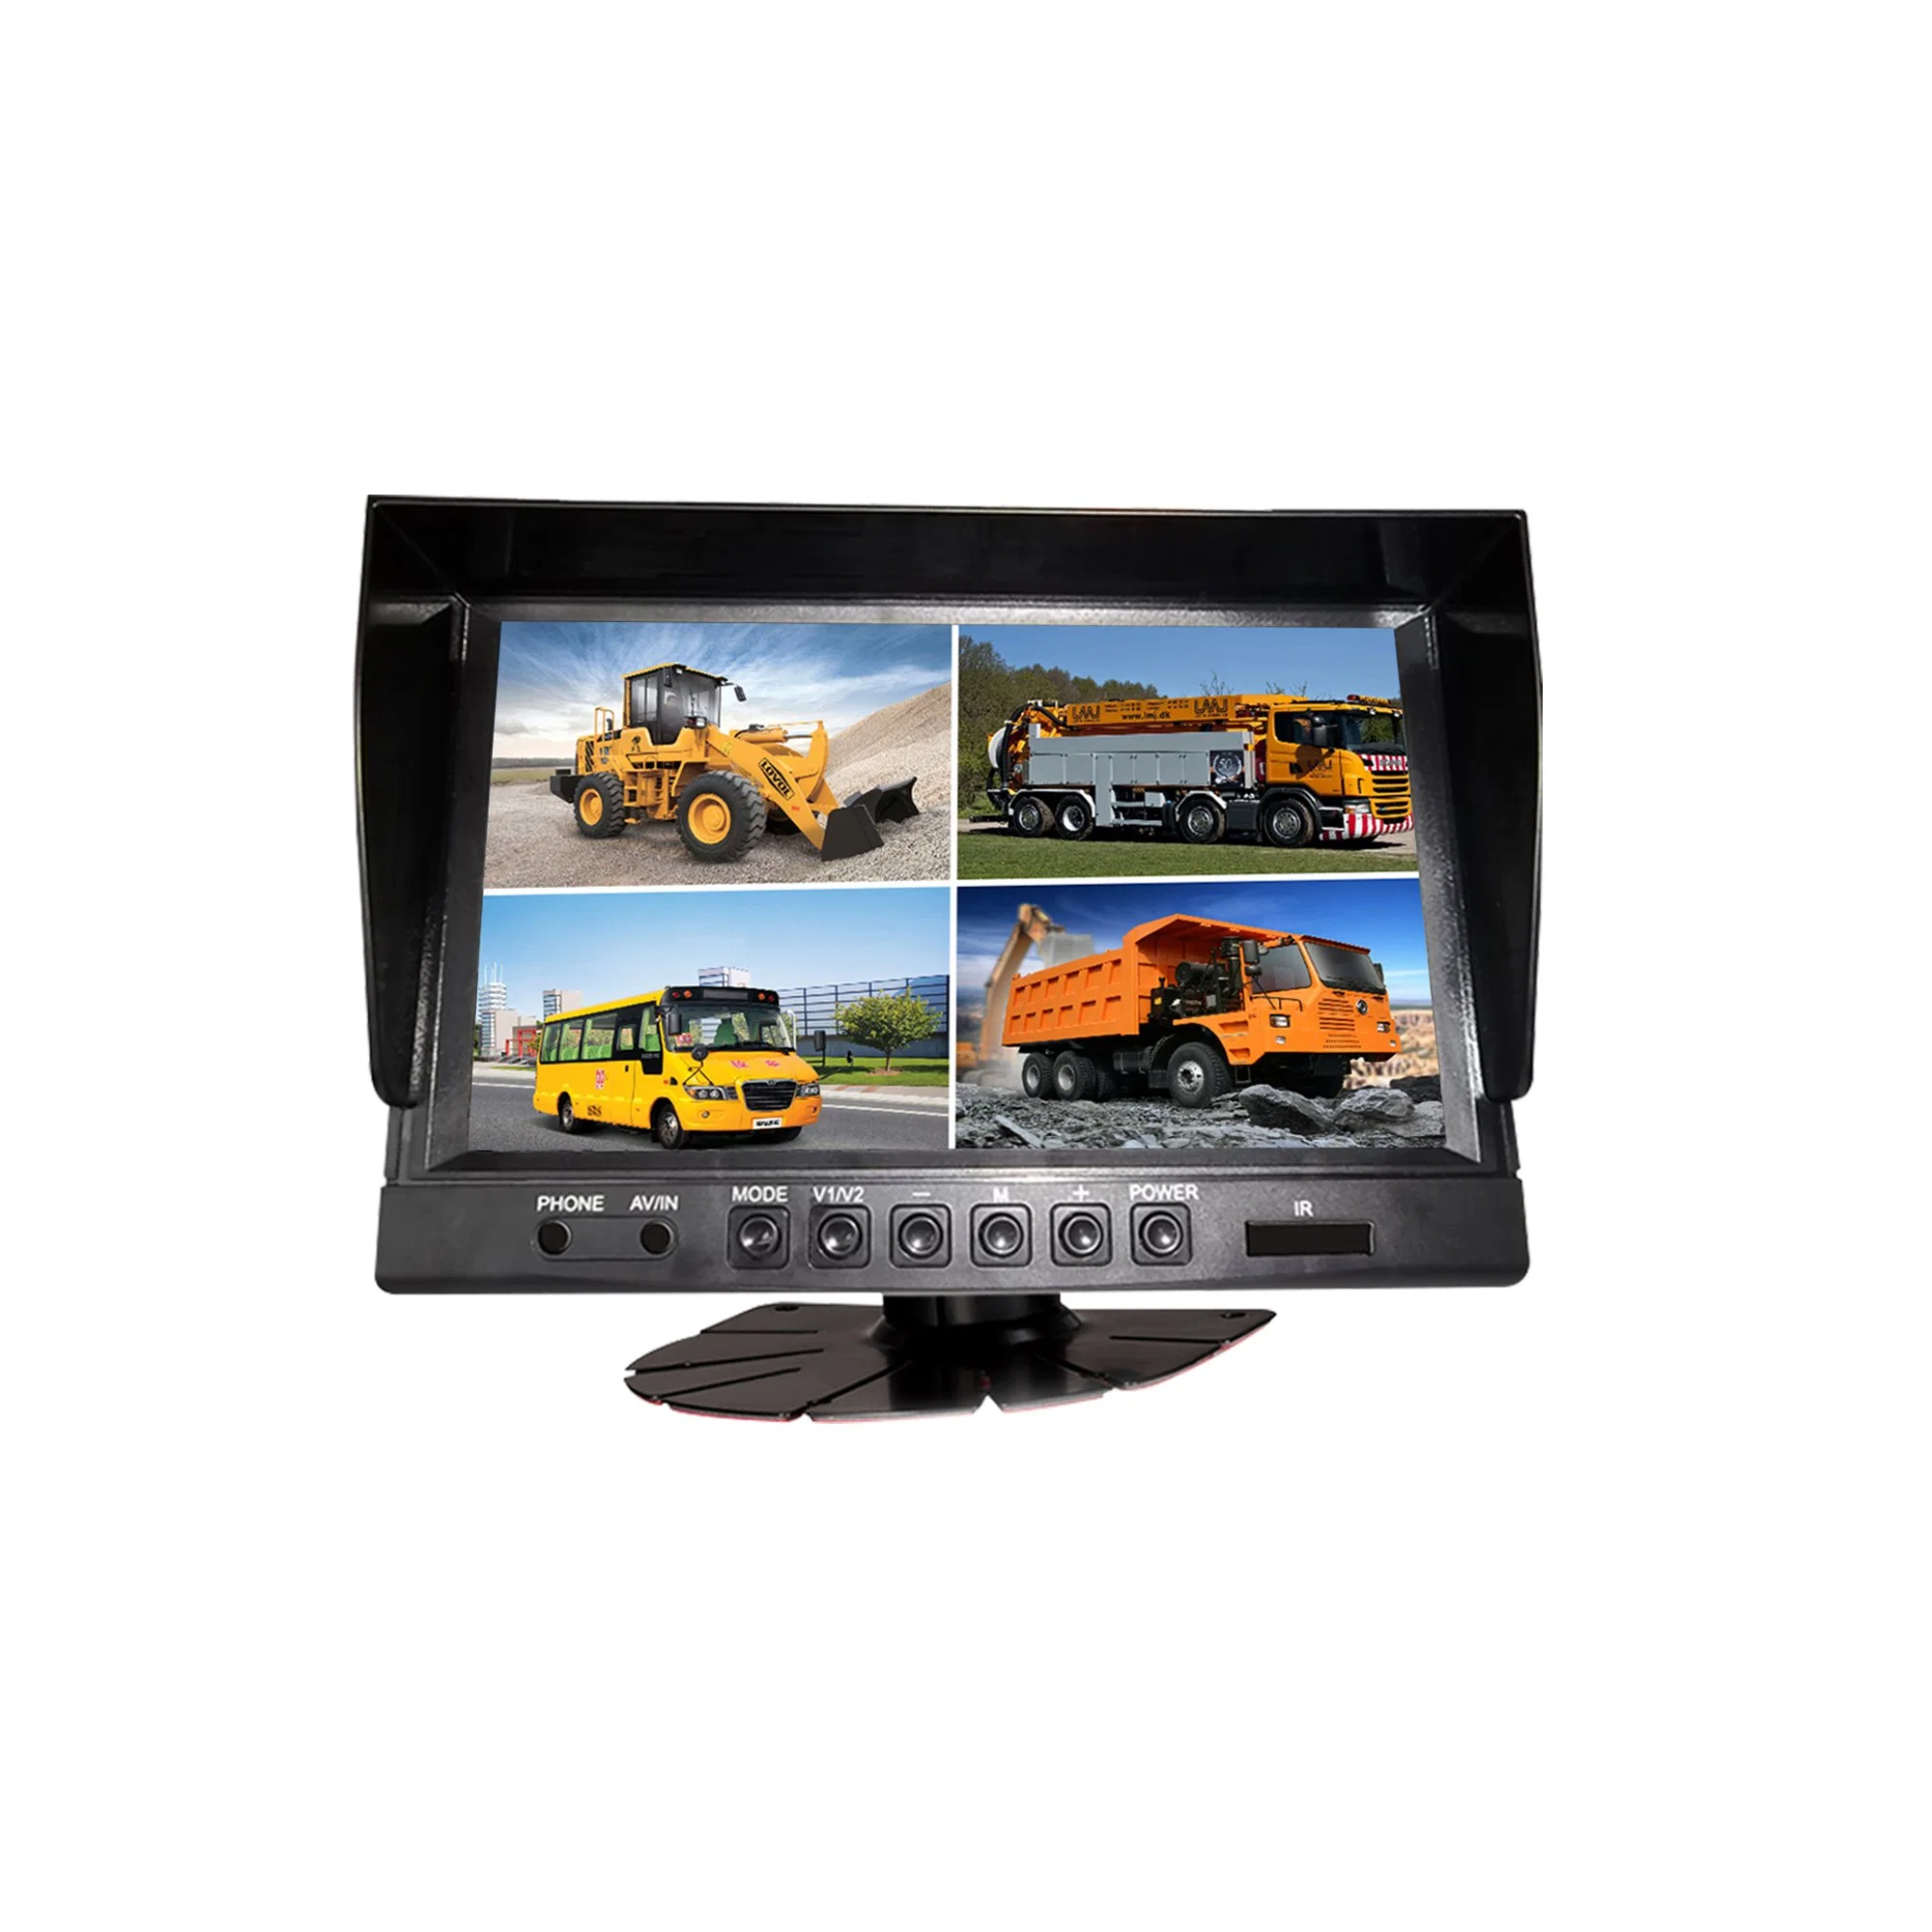 9inch Dash Mount Quad Monitor Car Display Screen with 4 Video Inputs for Reversing Aid Car TFT LCD